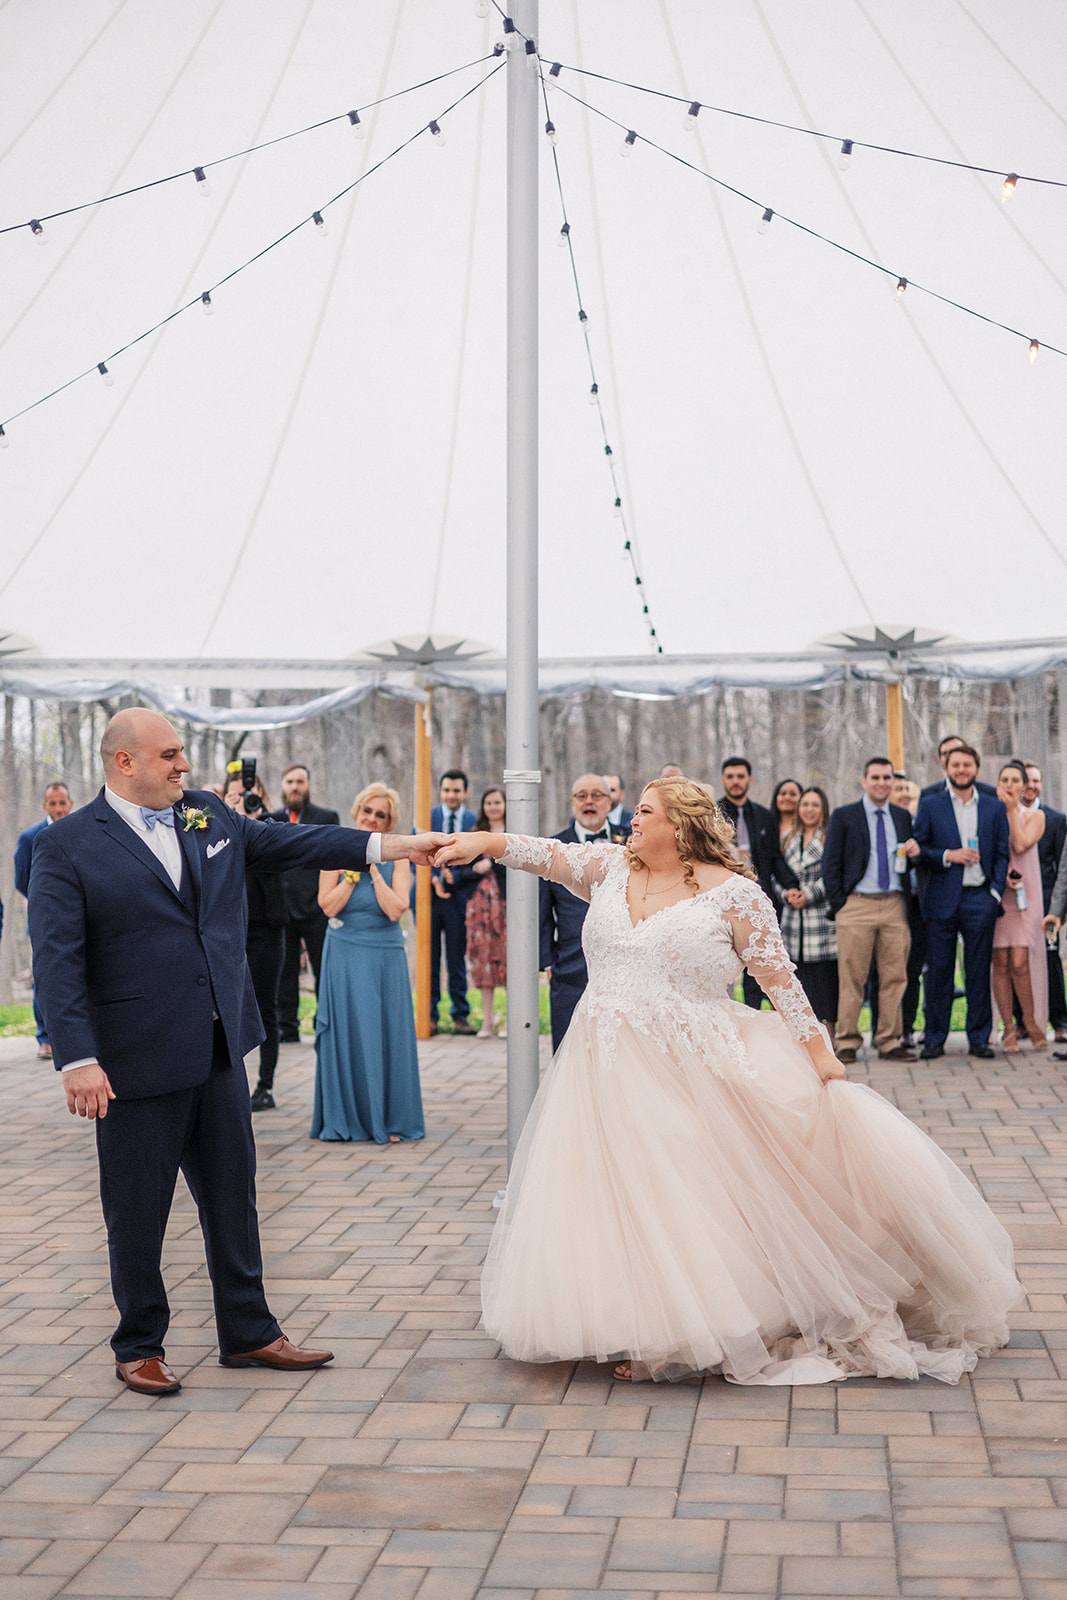 Newlyweds dance while holding hands under a large white tent on a brick patio at their reception